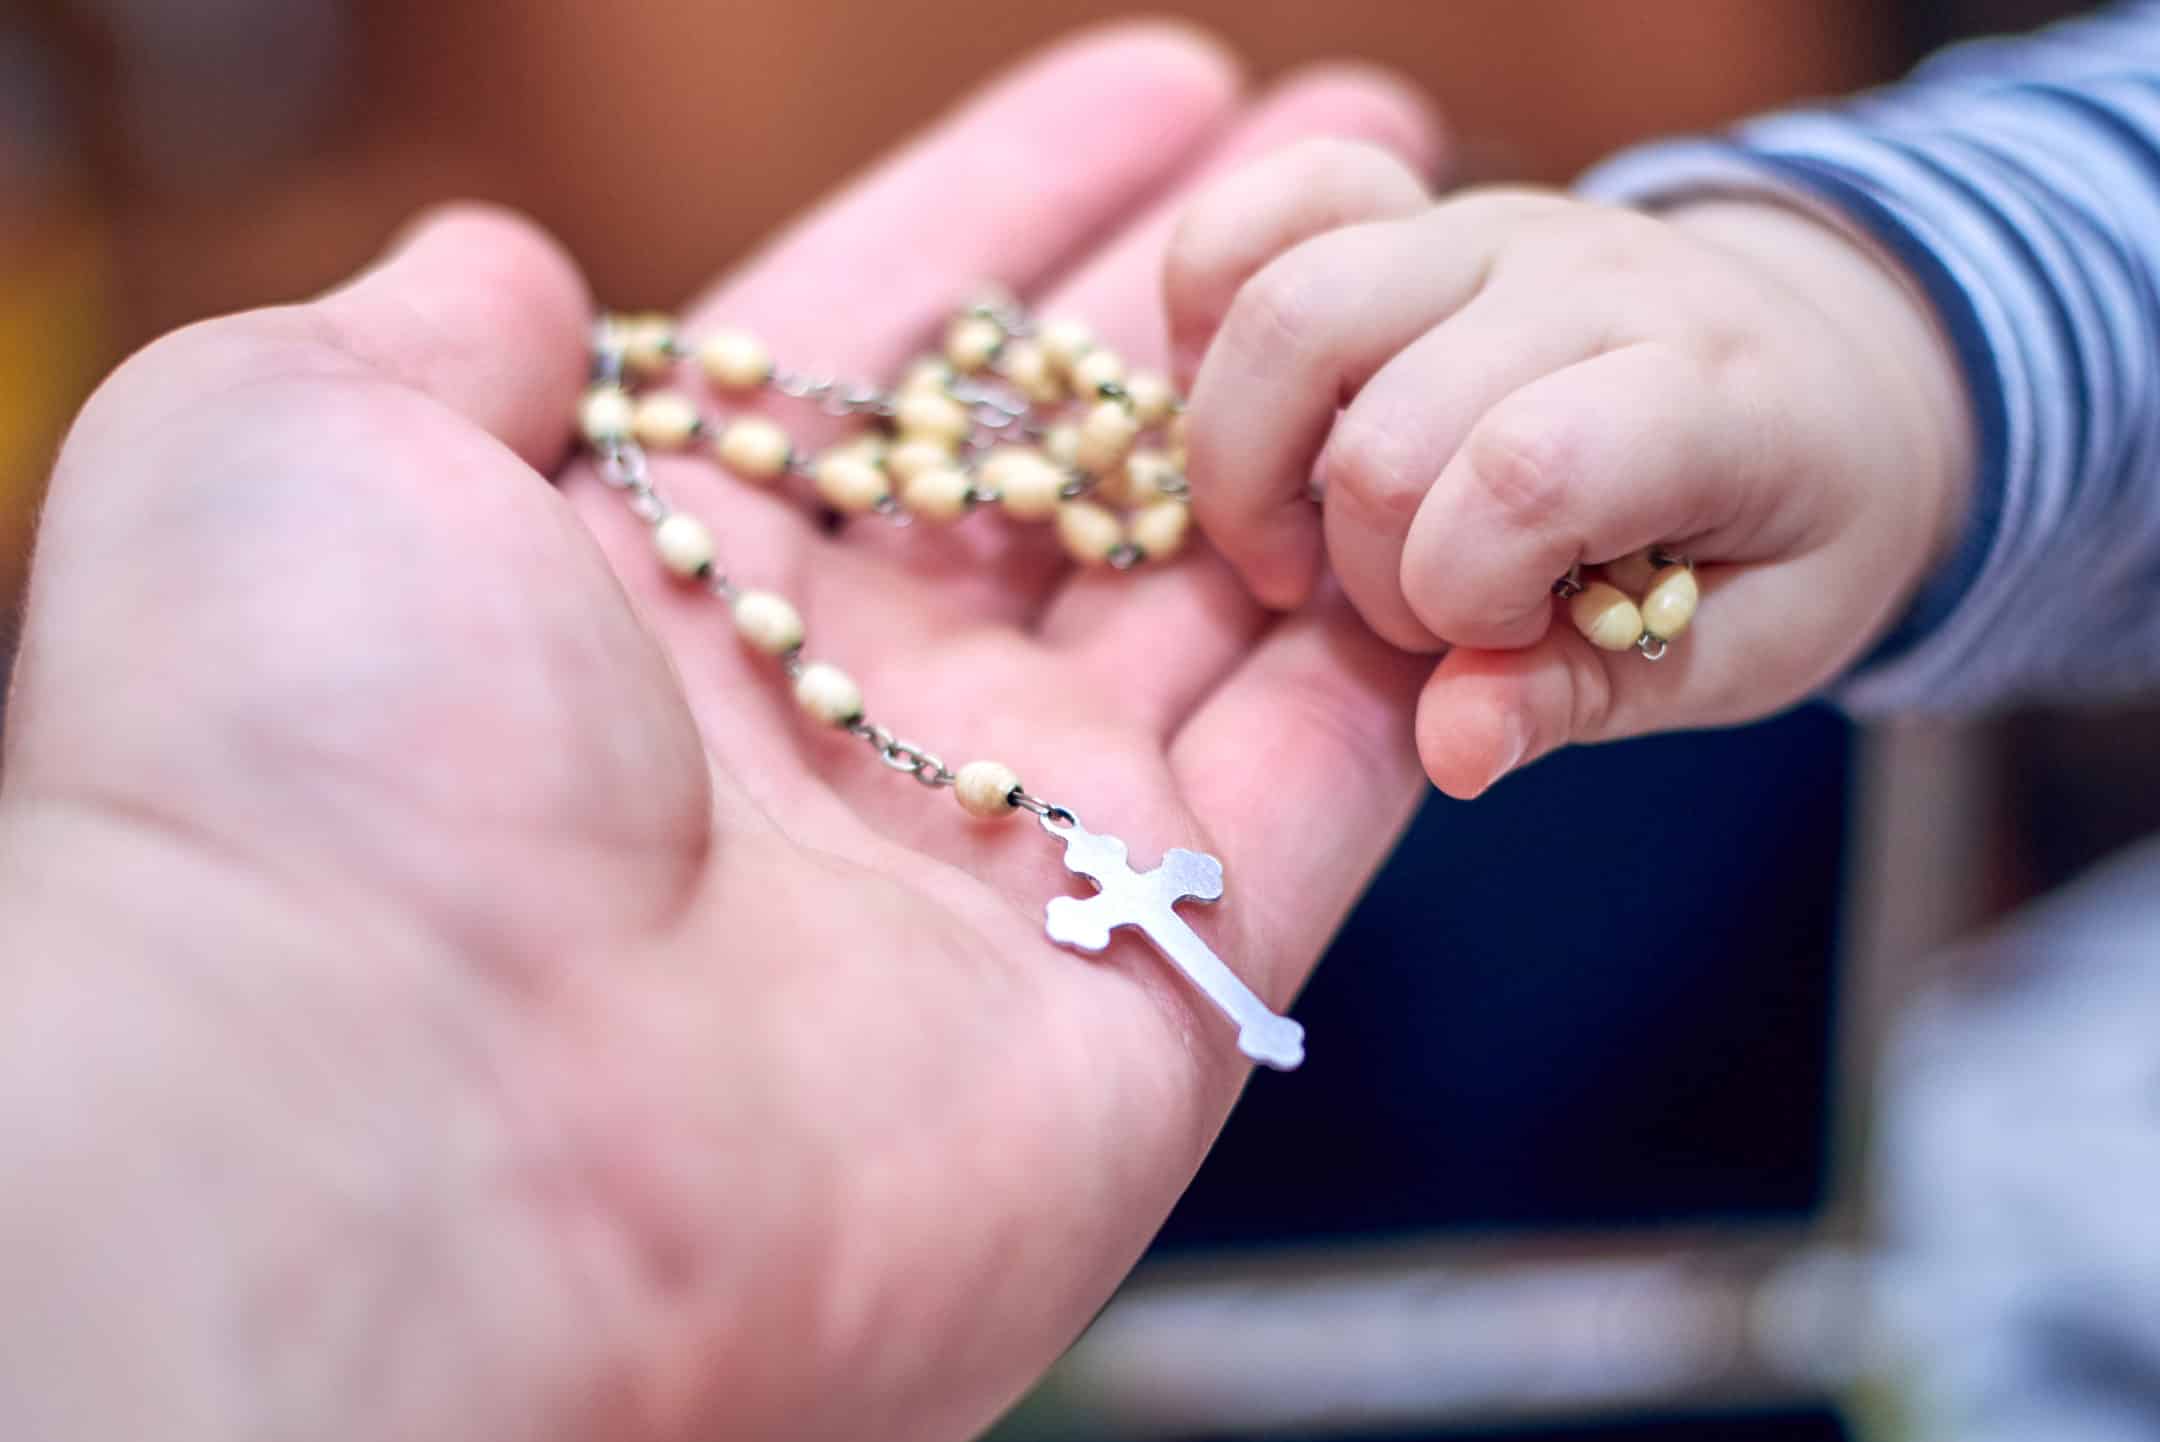 small child hand taking a rosary from his dad's hand